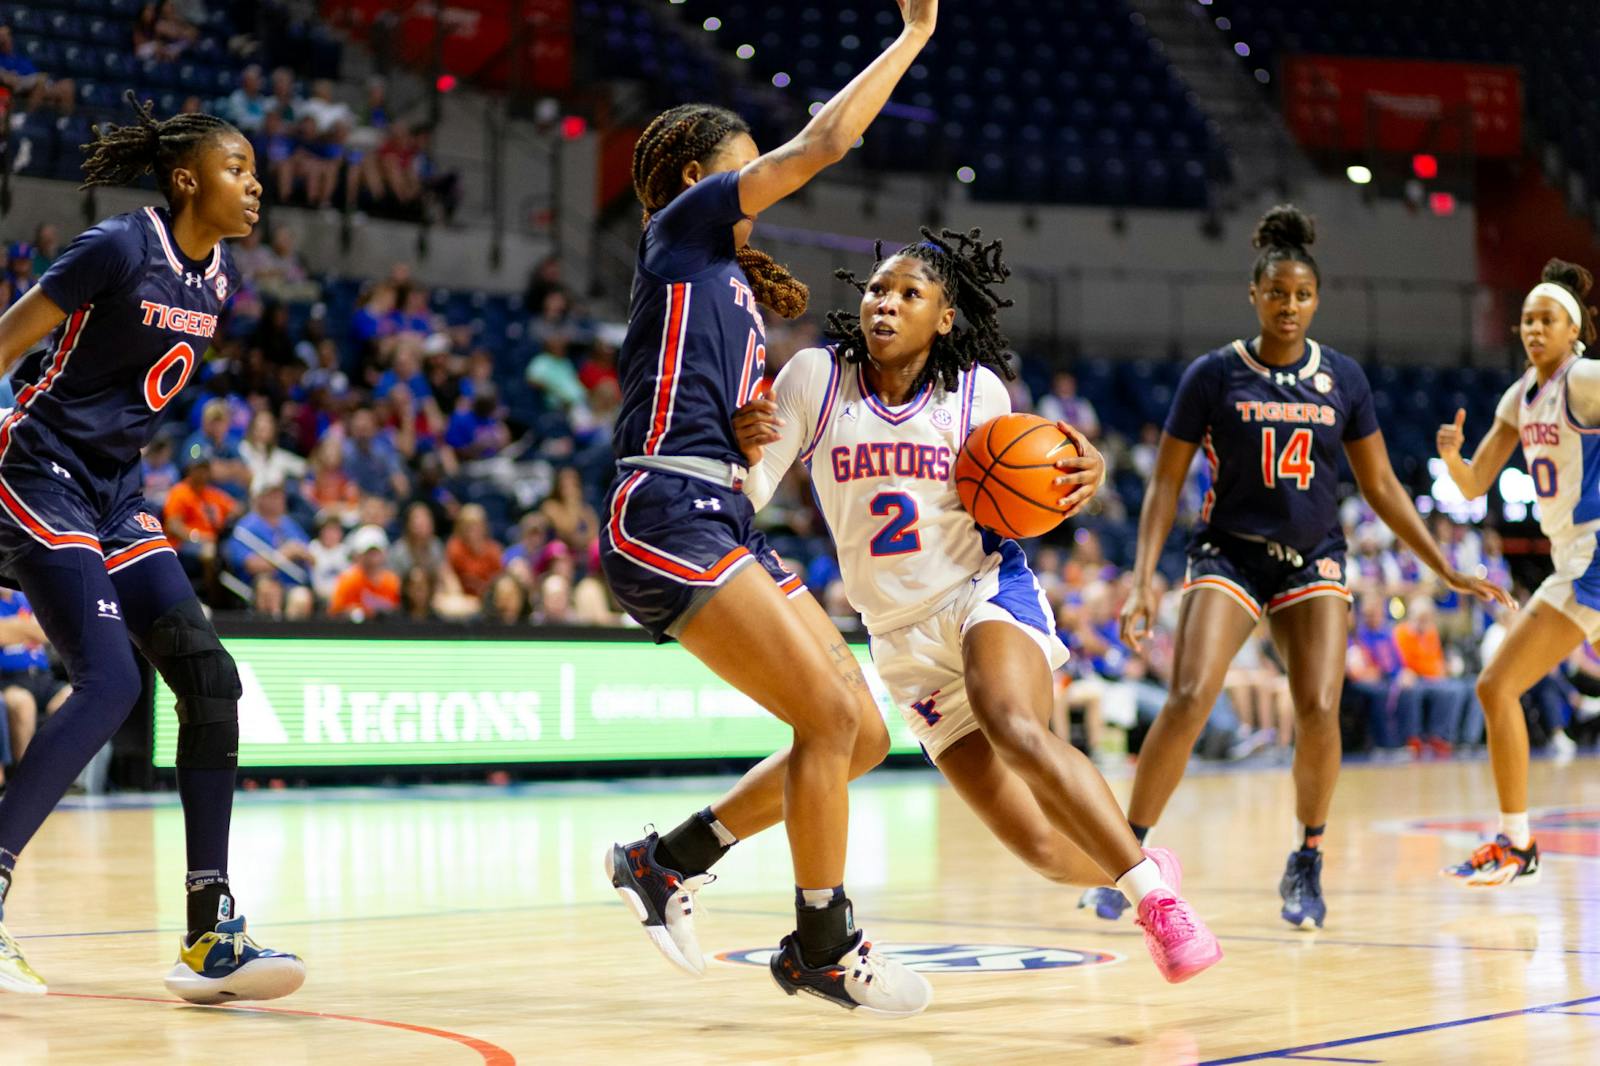 Ole Miss Women's Basketball - Freshmen Five are ready for their